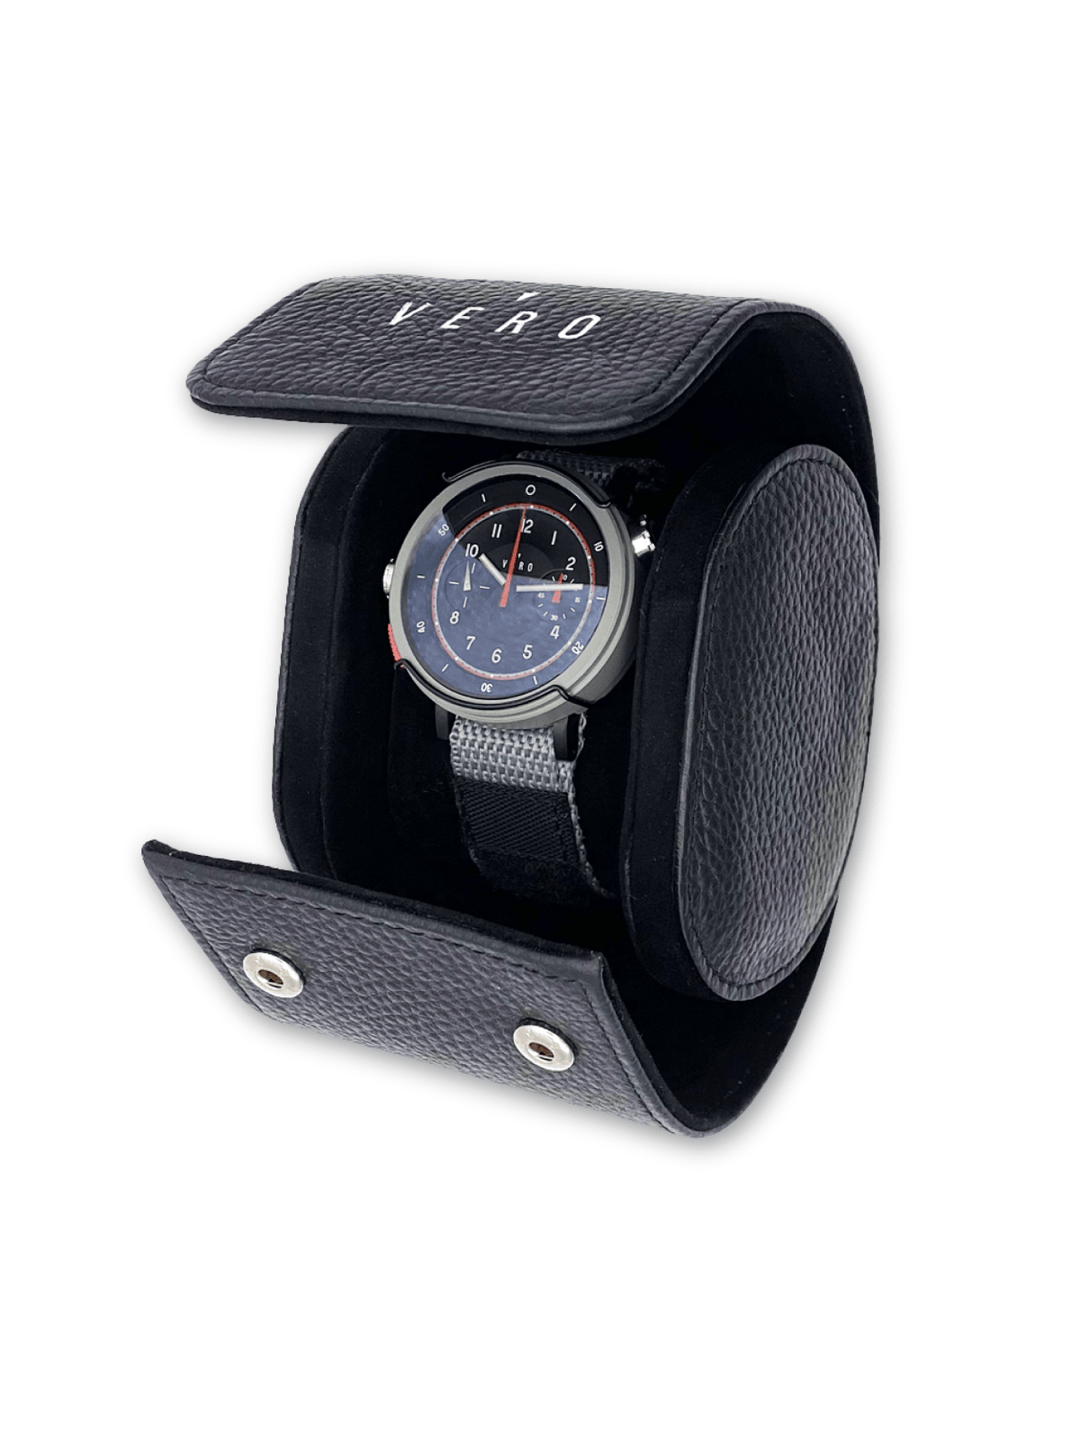 Leather Watch Travel Case - VERO Watch Company